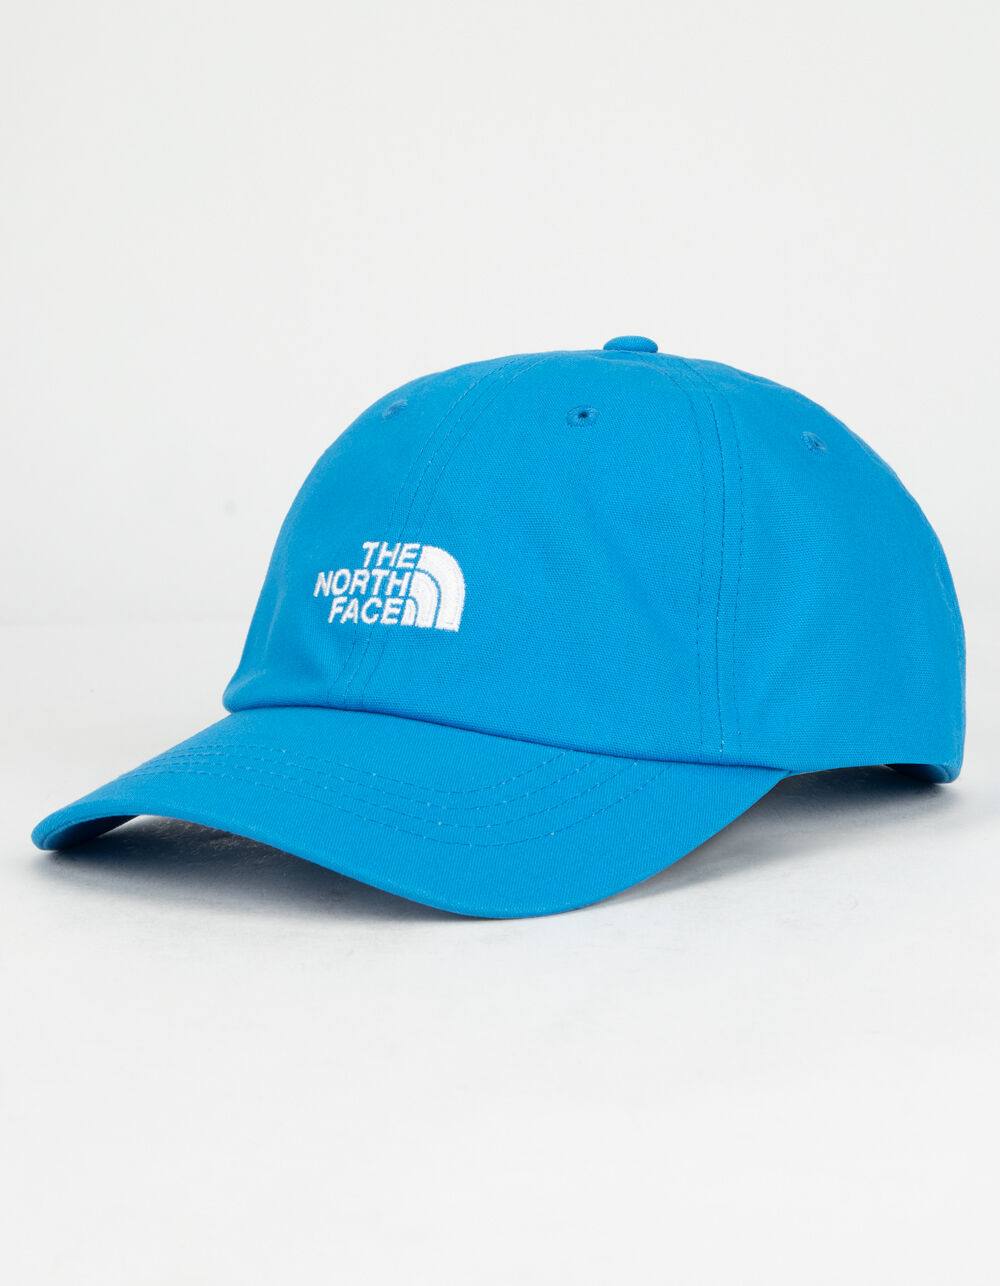 THE NORTH FACE Norm Blue Womens Strapback Hat - BLUE | Tillys